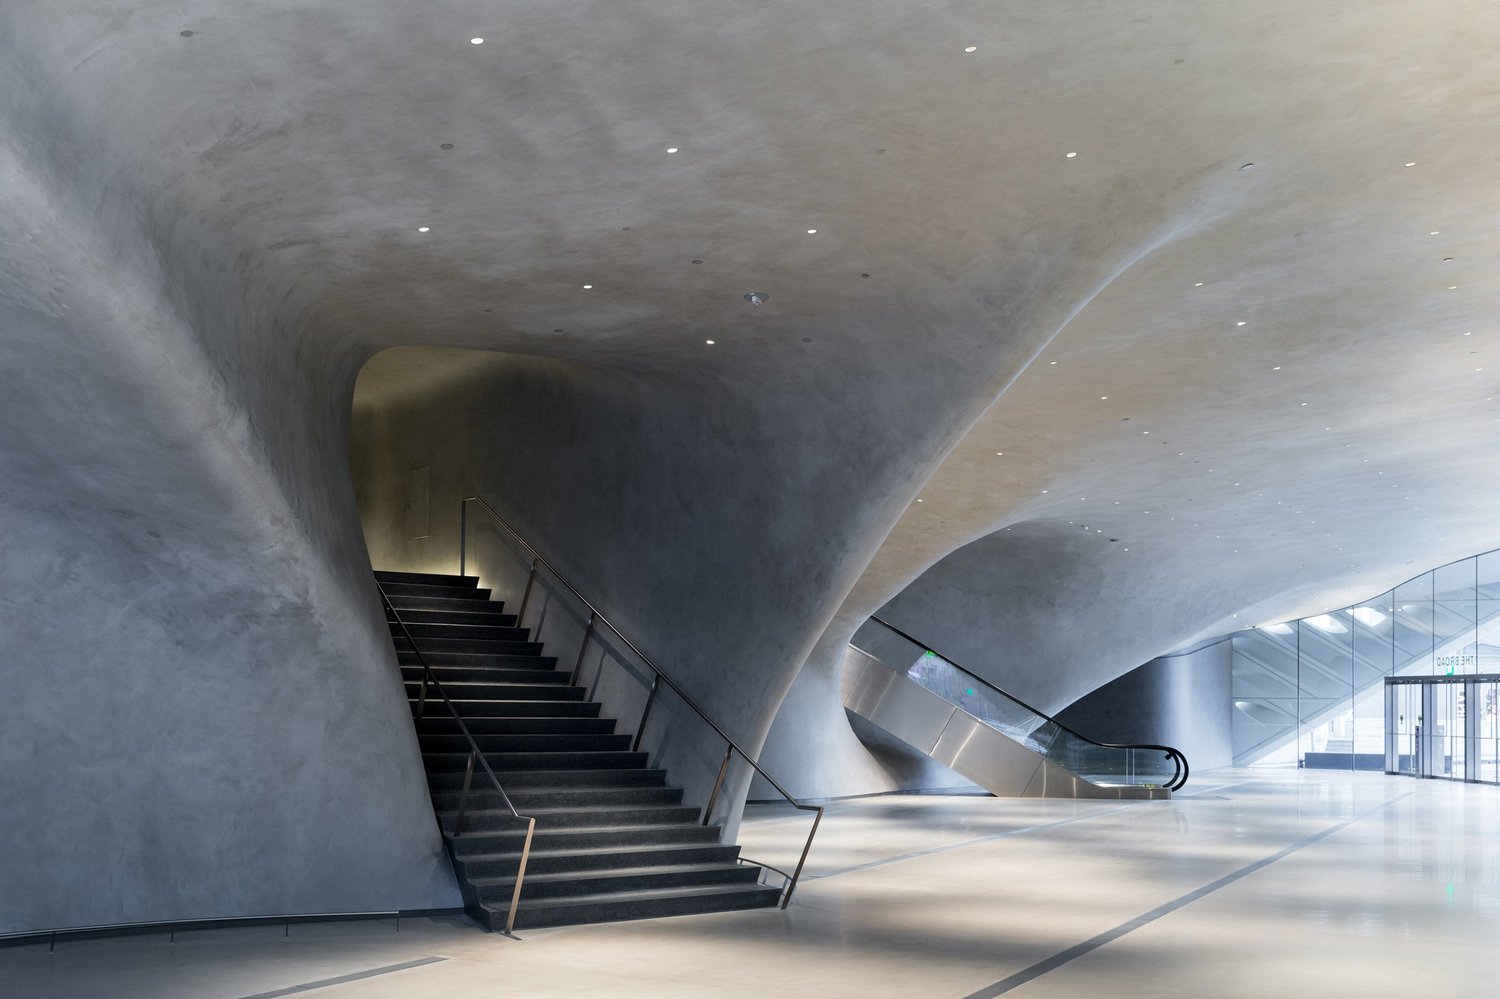 Contemporary Art Museum The Broad | © Iwan Baan, courtesy of The Broad and Diller Scofidio + Renfro